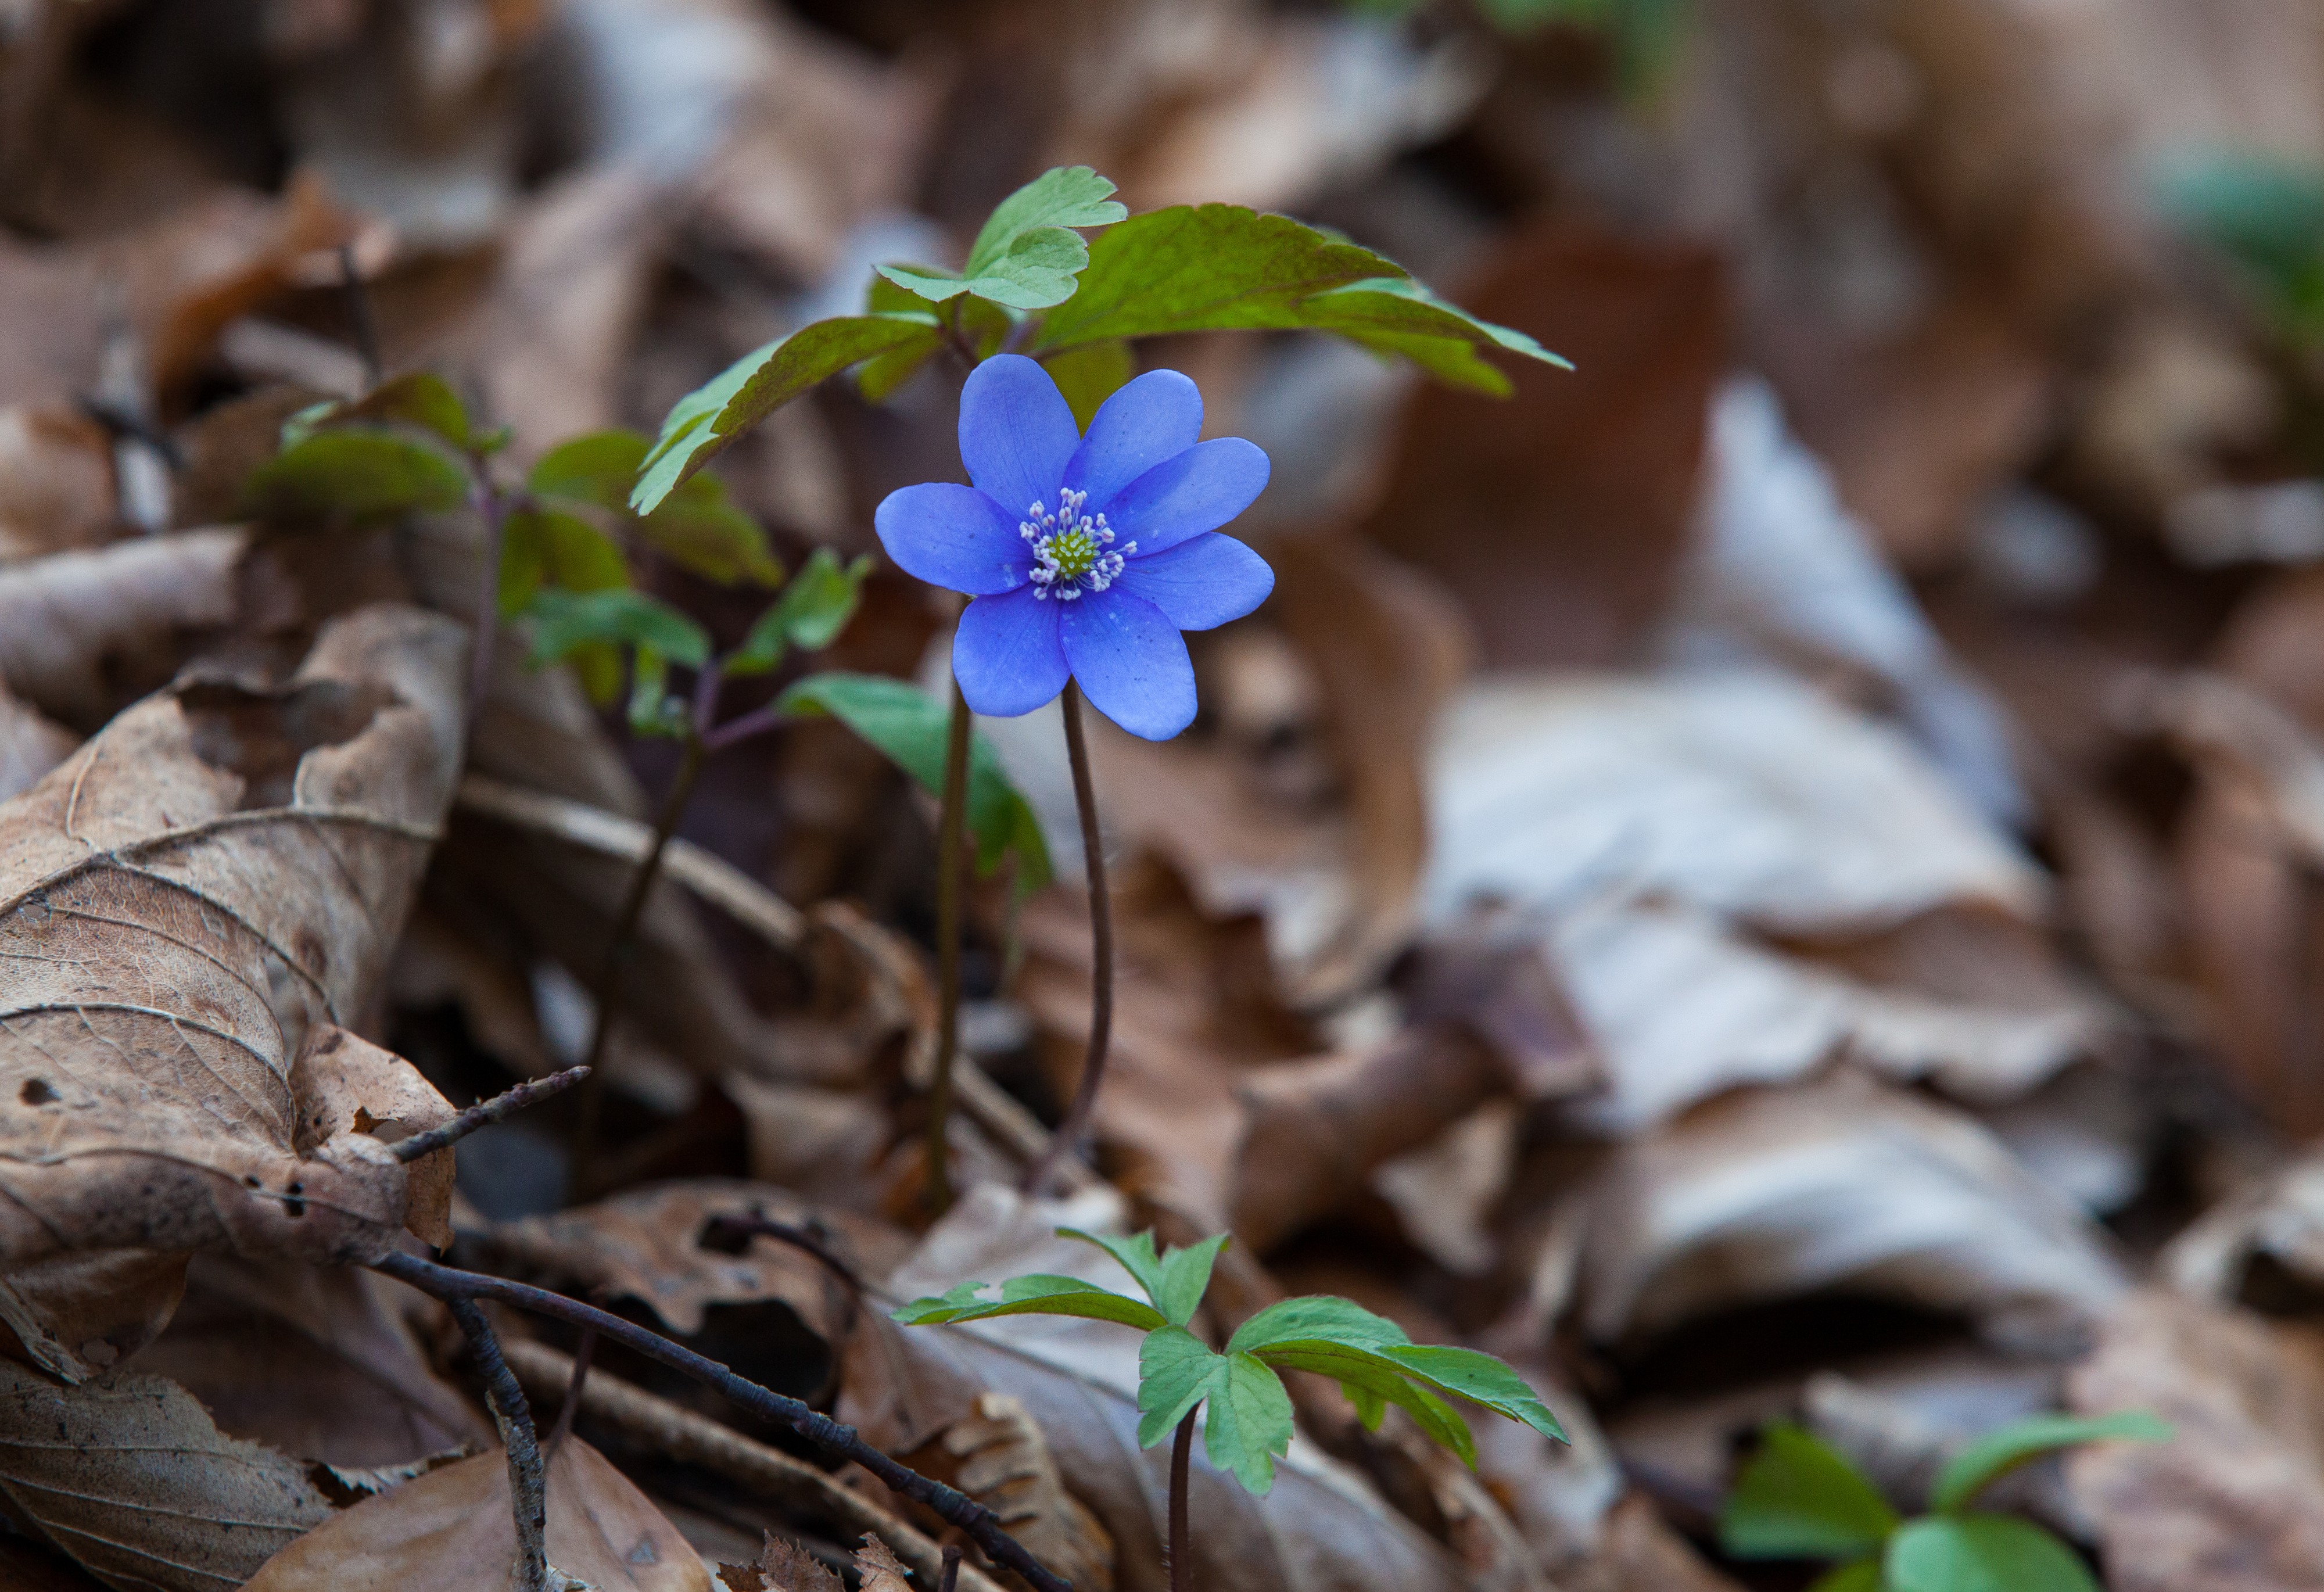 Photo of a blue flower in a forest in Lviv region of Ukraine in March 2014